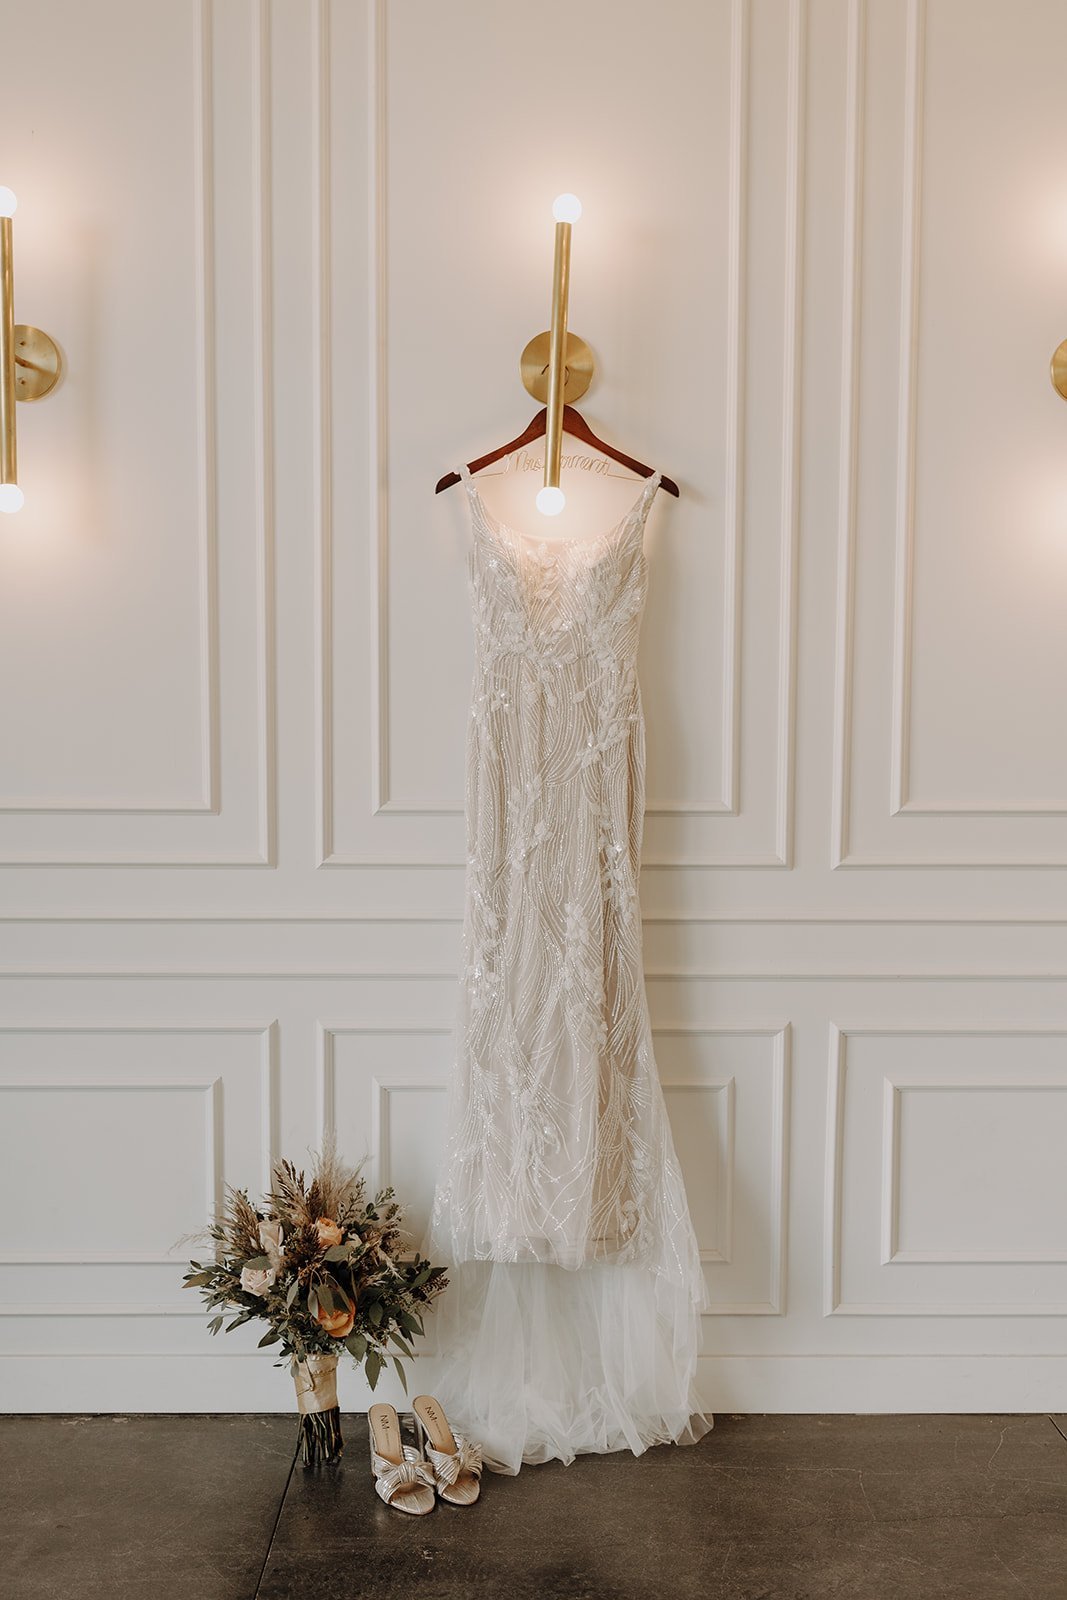 Bridal gown and flowers for non-traditional wedding in Illinois